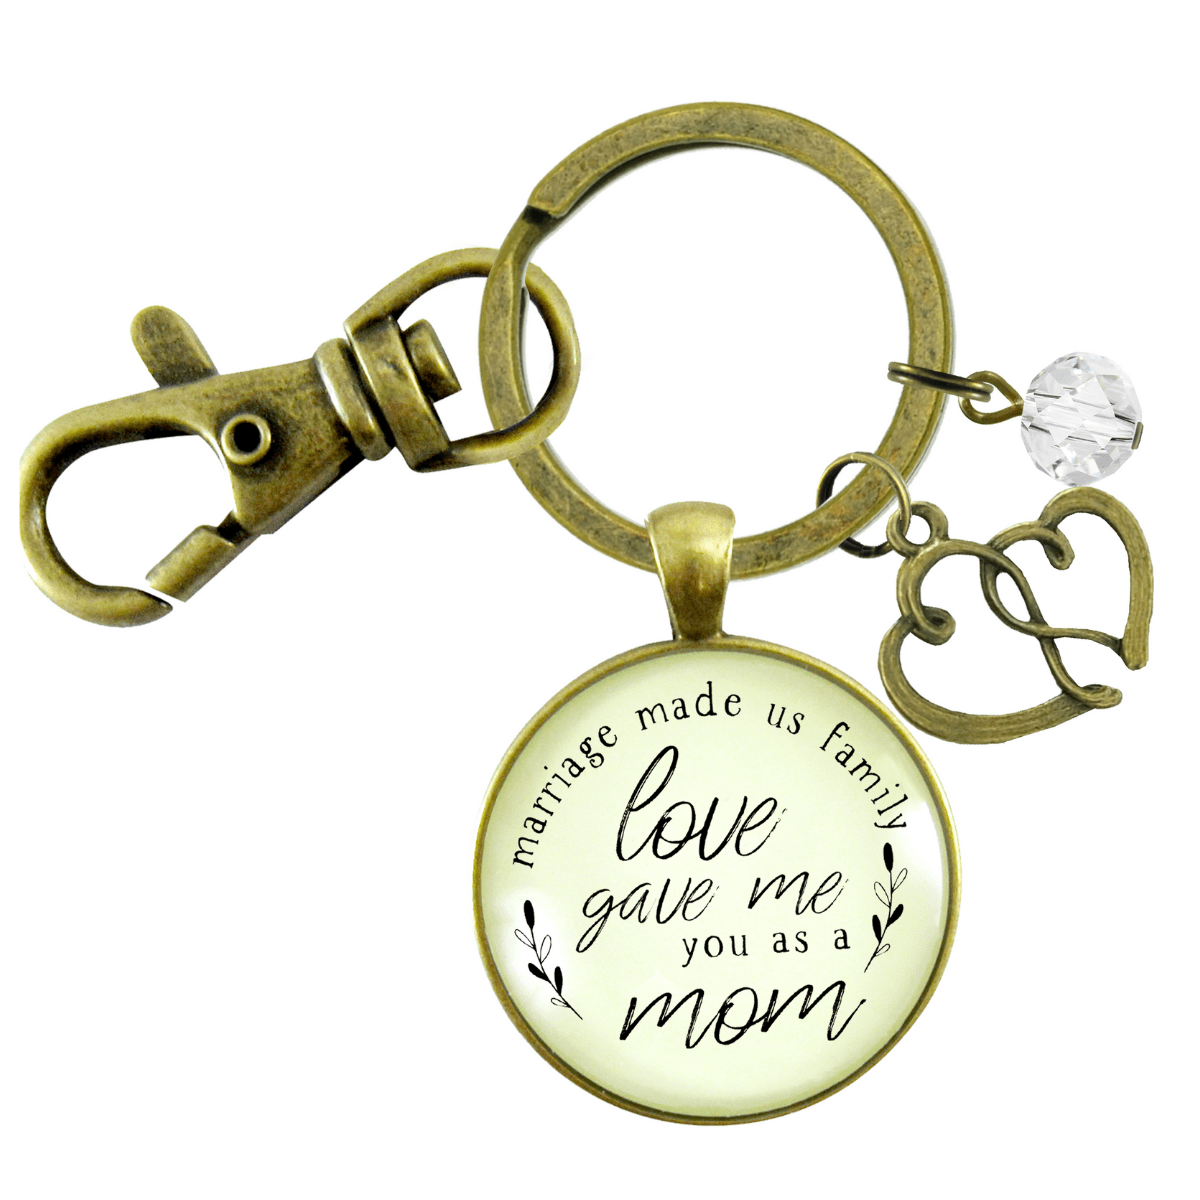 Mother In Law Keychain Blended Family Step Mom Gift Marriage Made Us Family Jewelry Heart - Gutsy Goodness Handmade Jewelry;Mother In Law Keychain Blended Family Step Mom Gift Marriage Made Us Family Jewelry Heart - Gutsy Goodness Handmade Jewelry Gifts